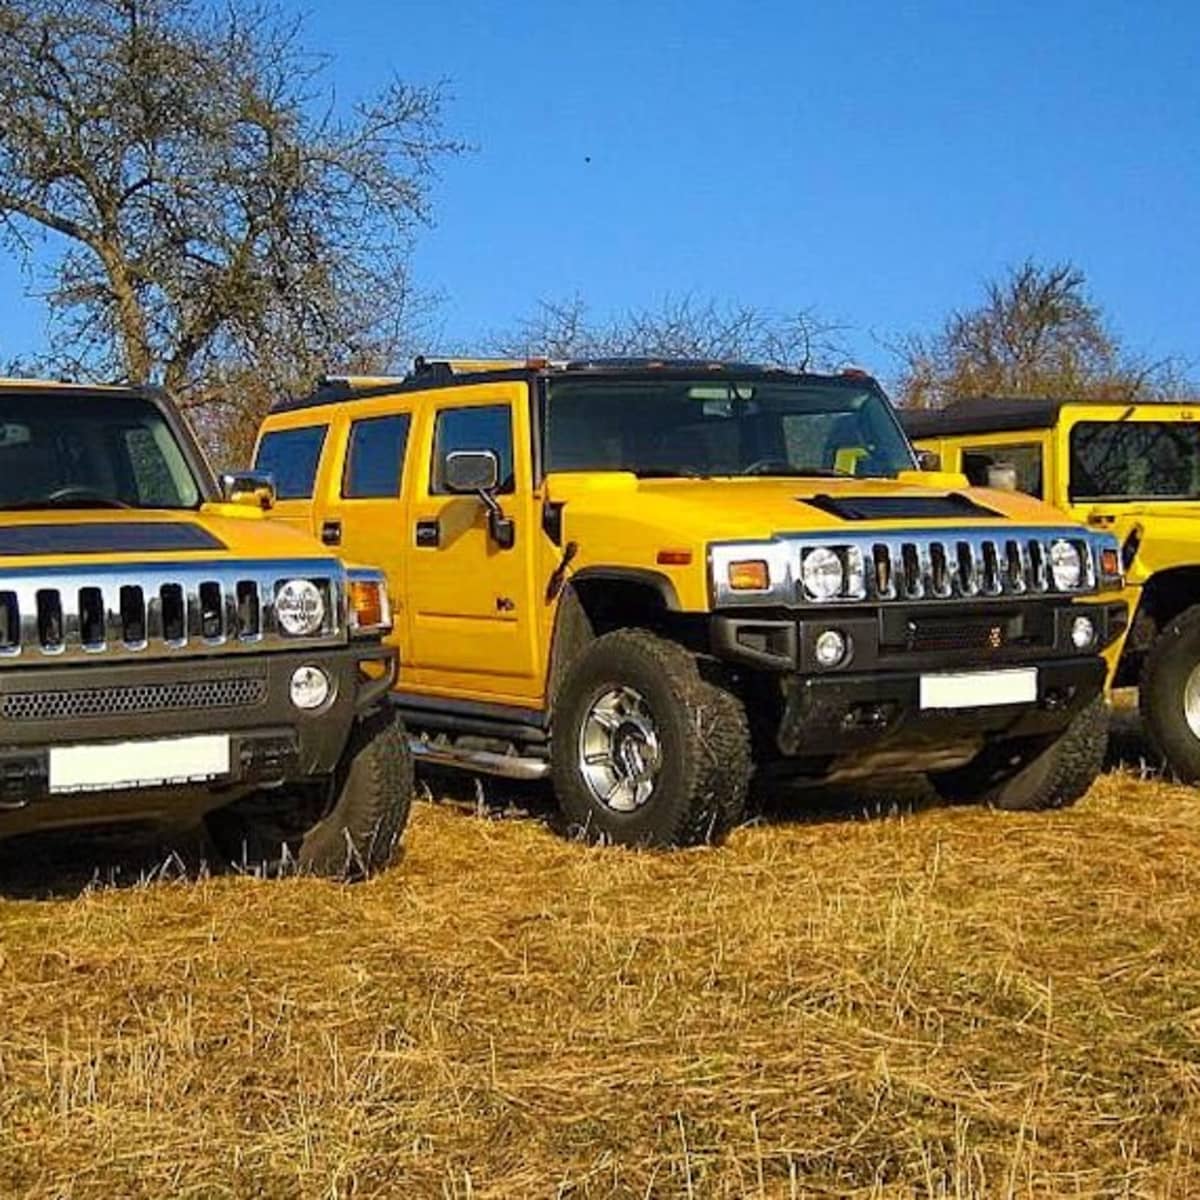 Whatever Happened to the Hummer? - AxleAddict